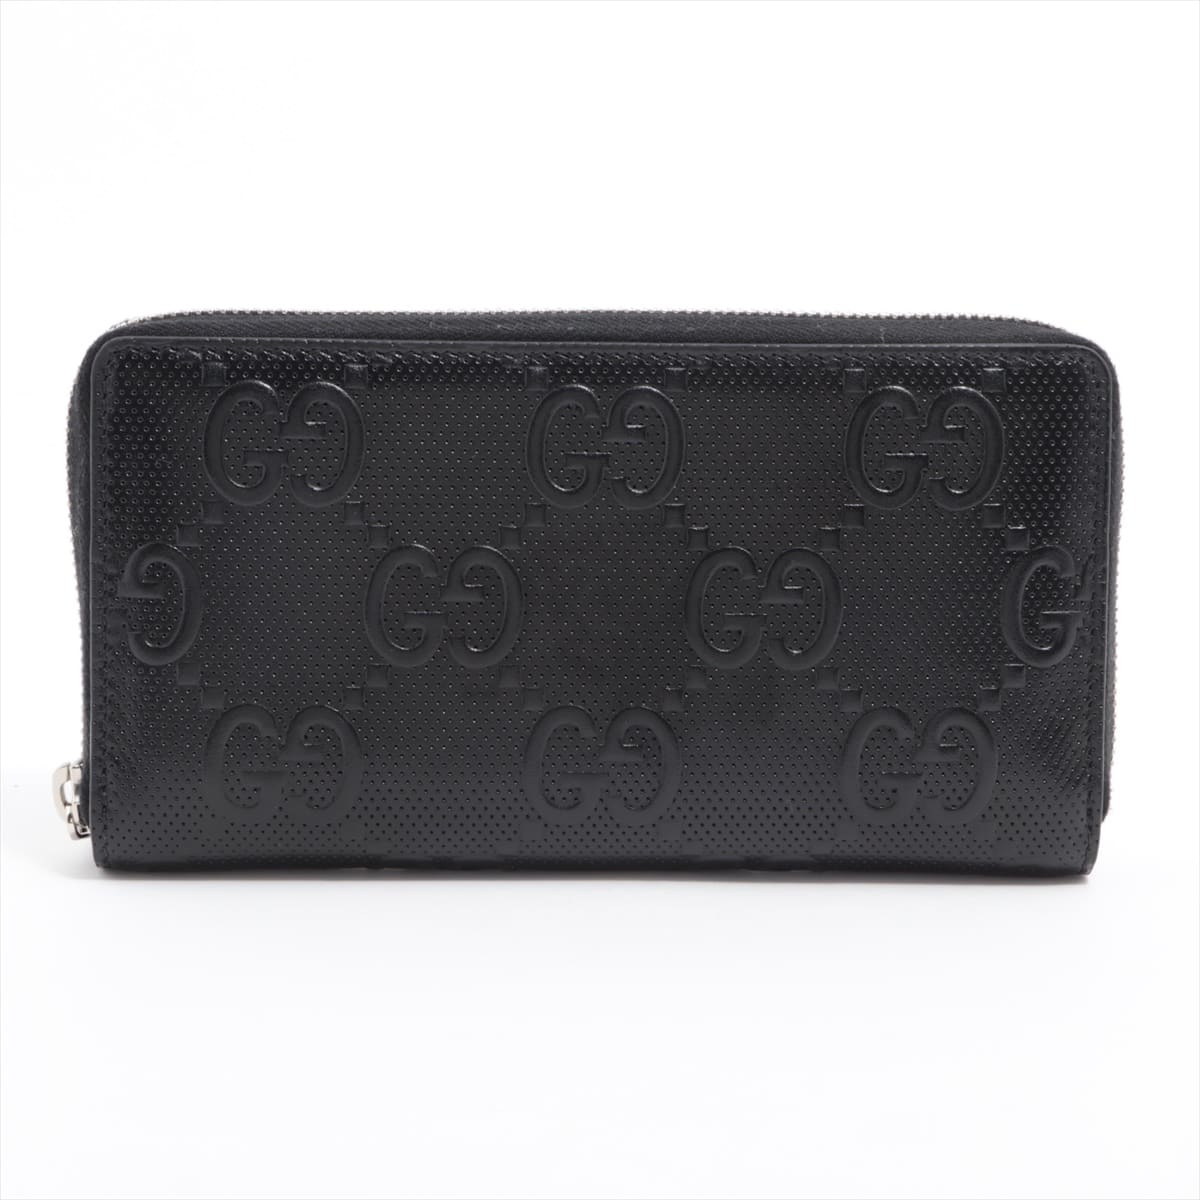 Gucci GG embossed 625558 Leather Wallet Black